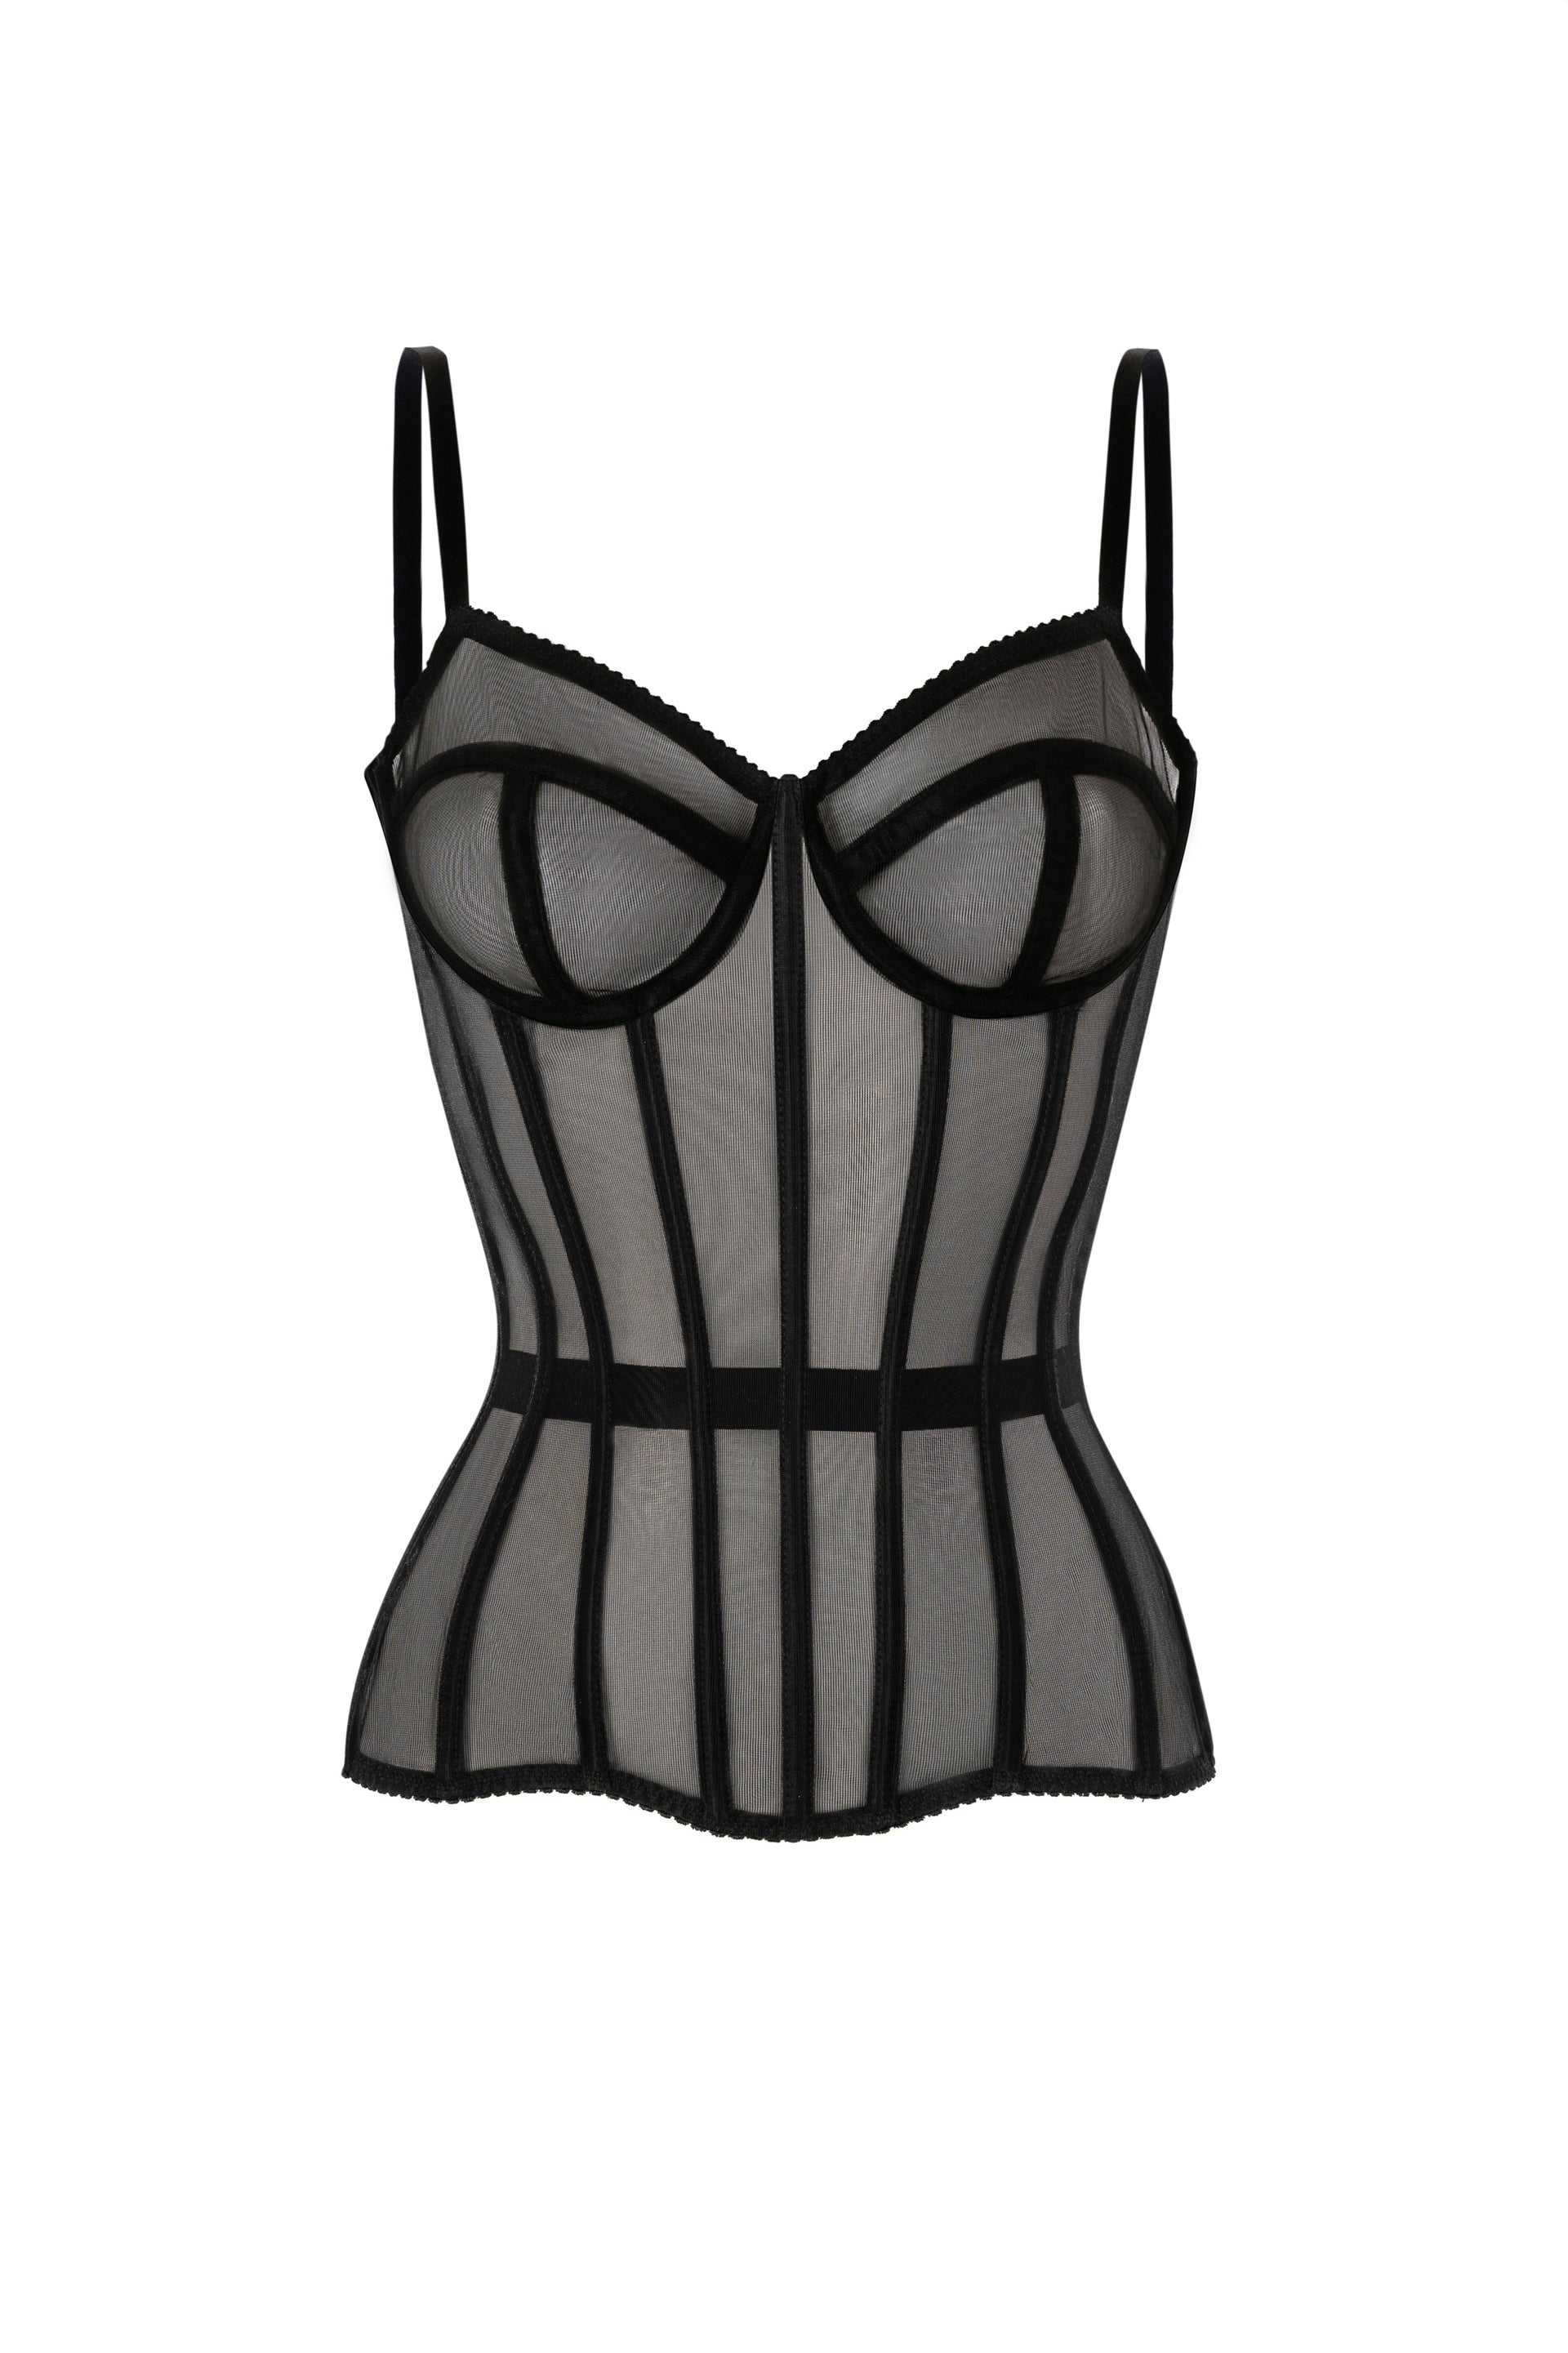 Black corset with transparent cups